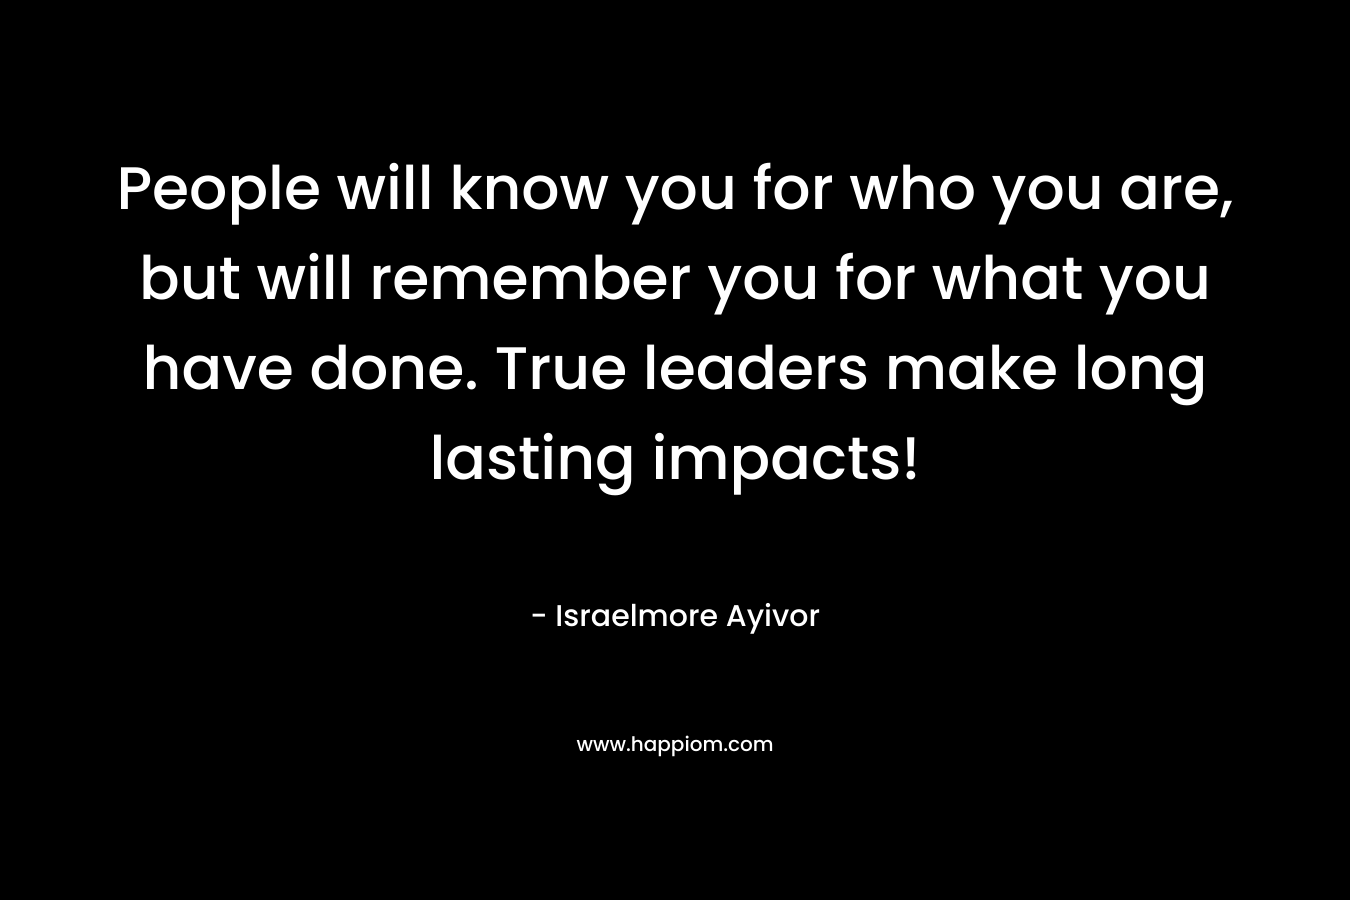 People will know you for who you are, but will remember you for what you have done. True leaders make long lasting impacts!